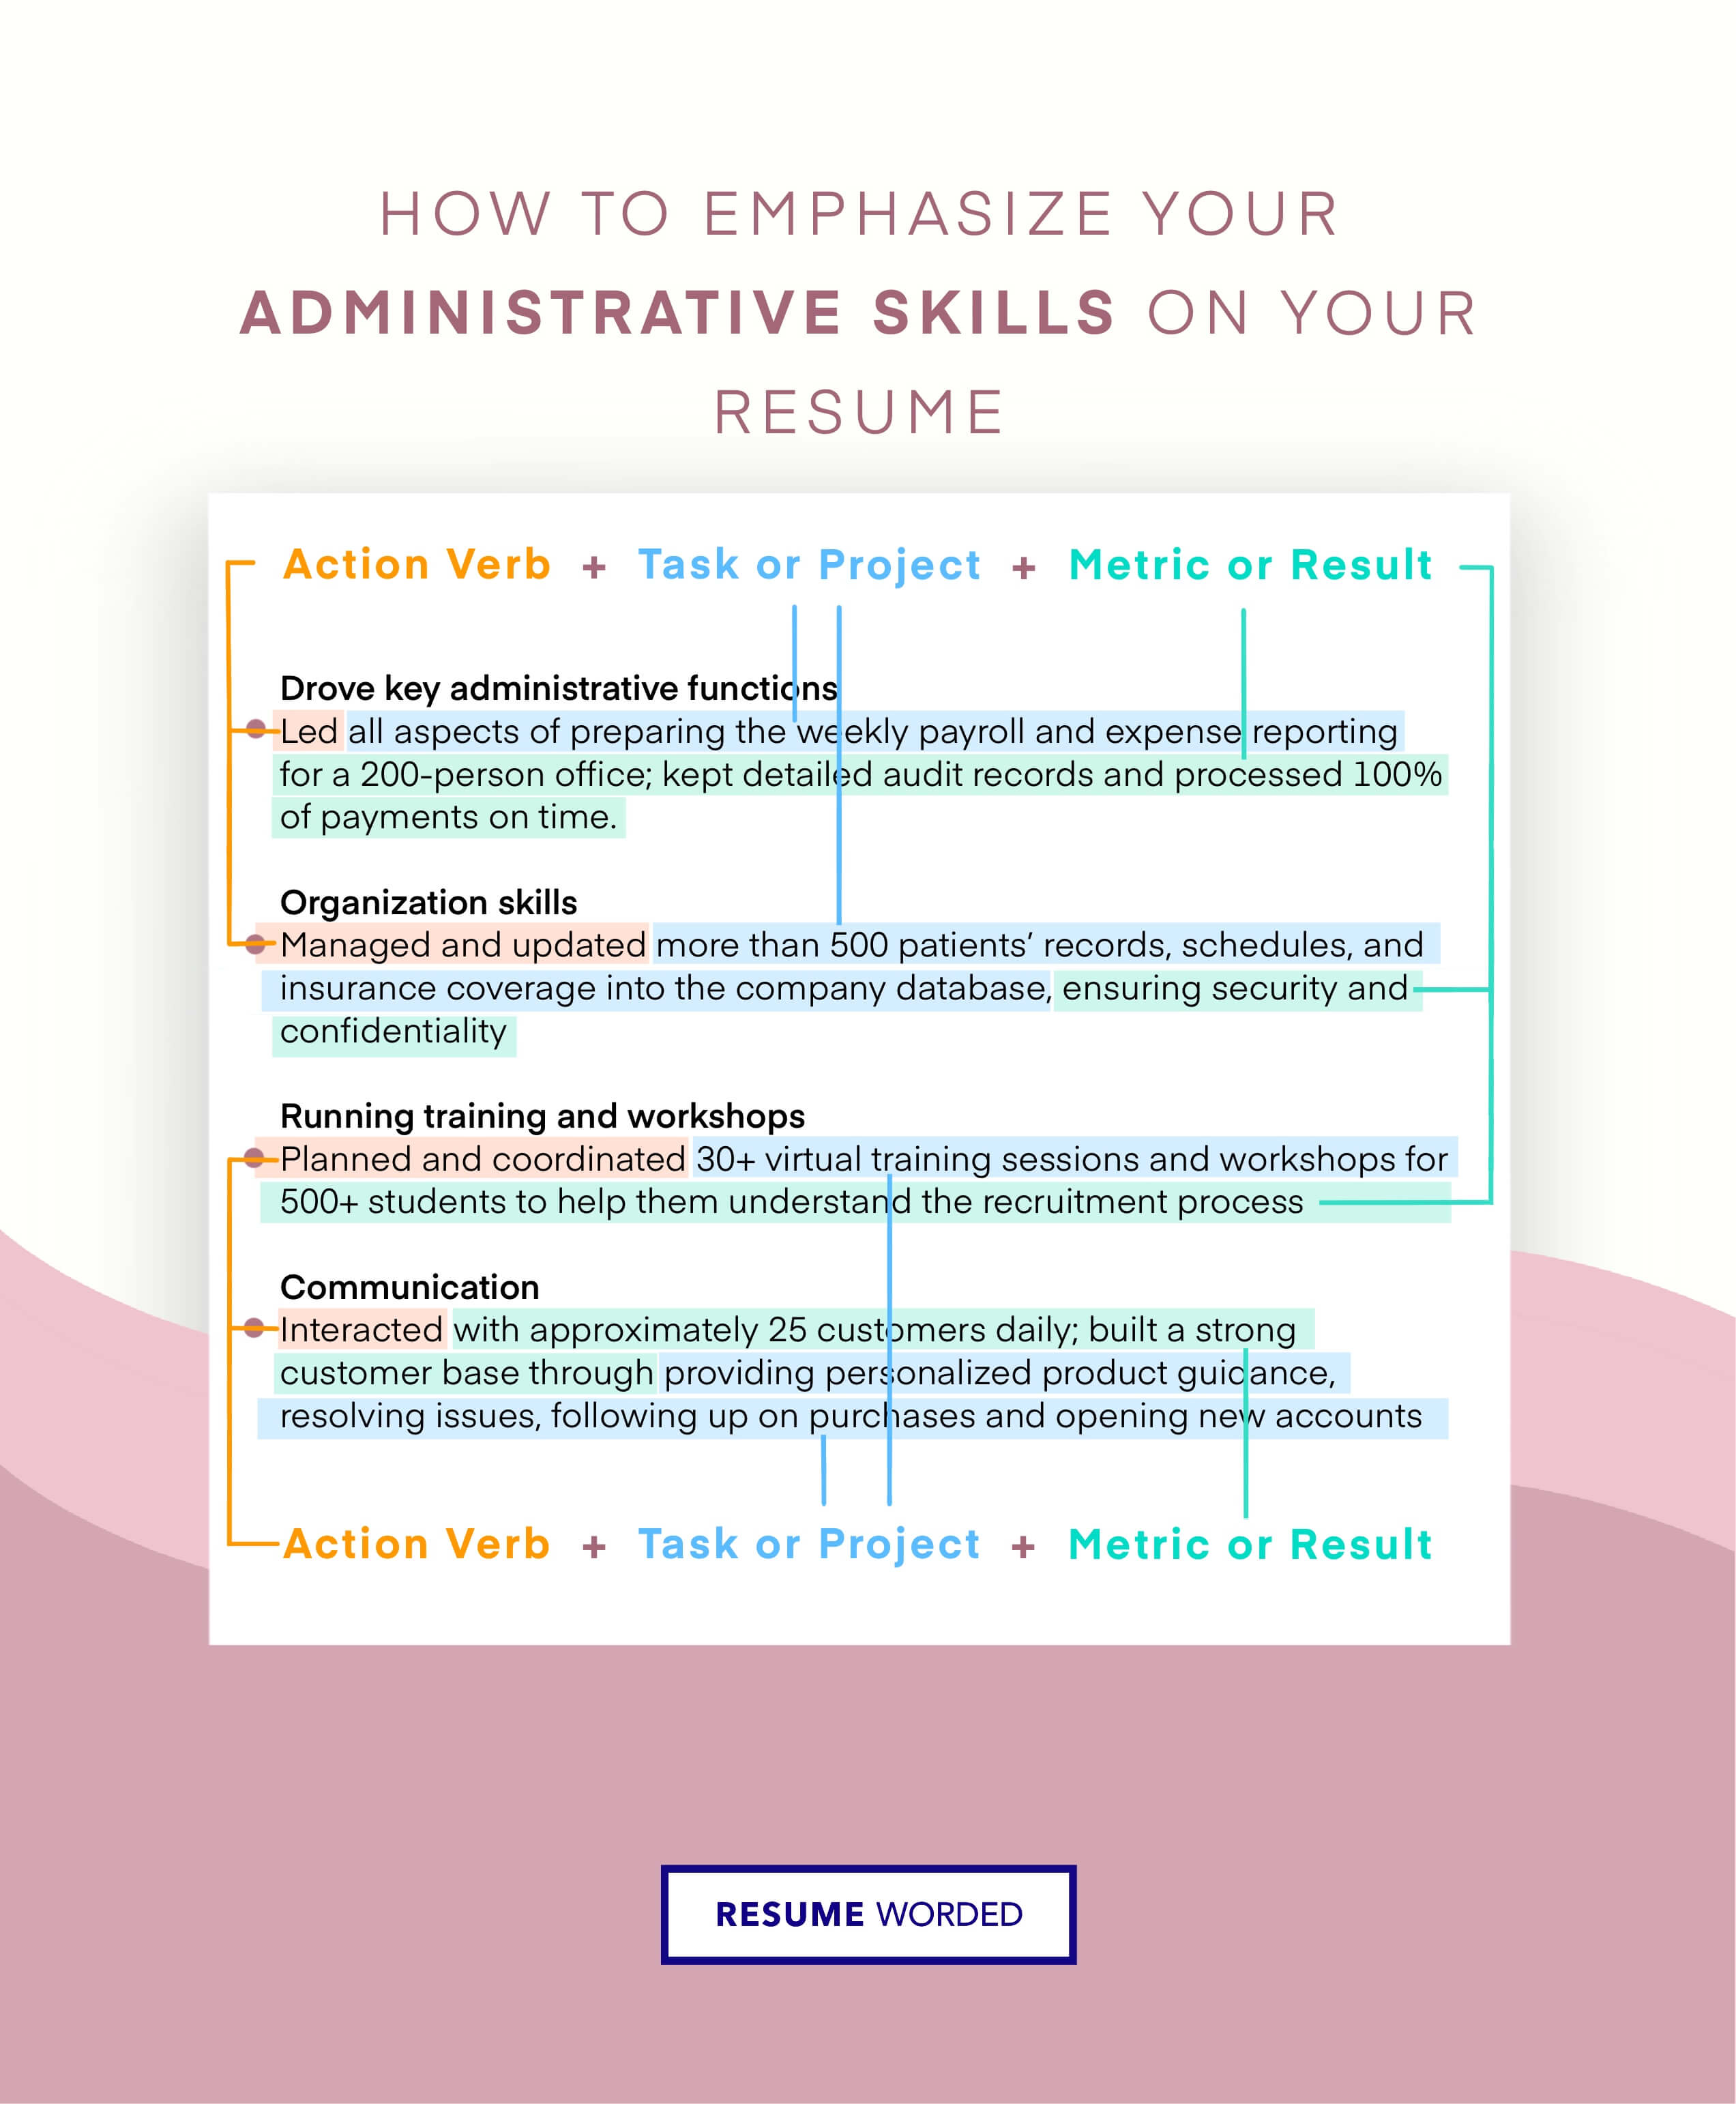 Focus on your administrative skills - Dental Office Manager CV